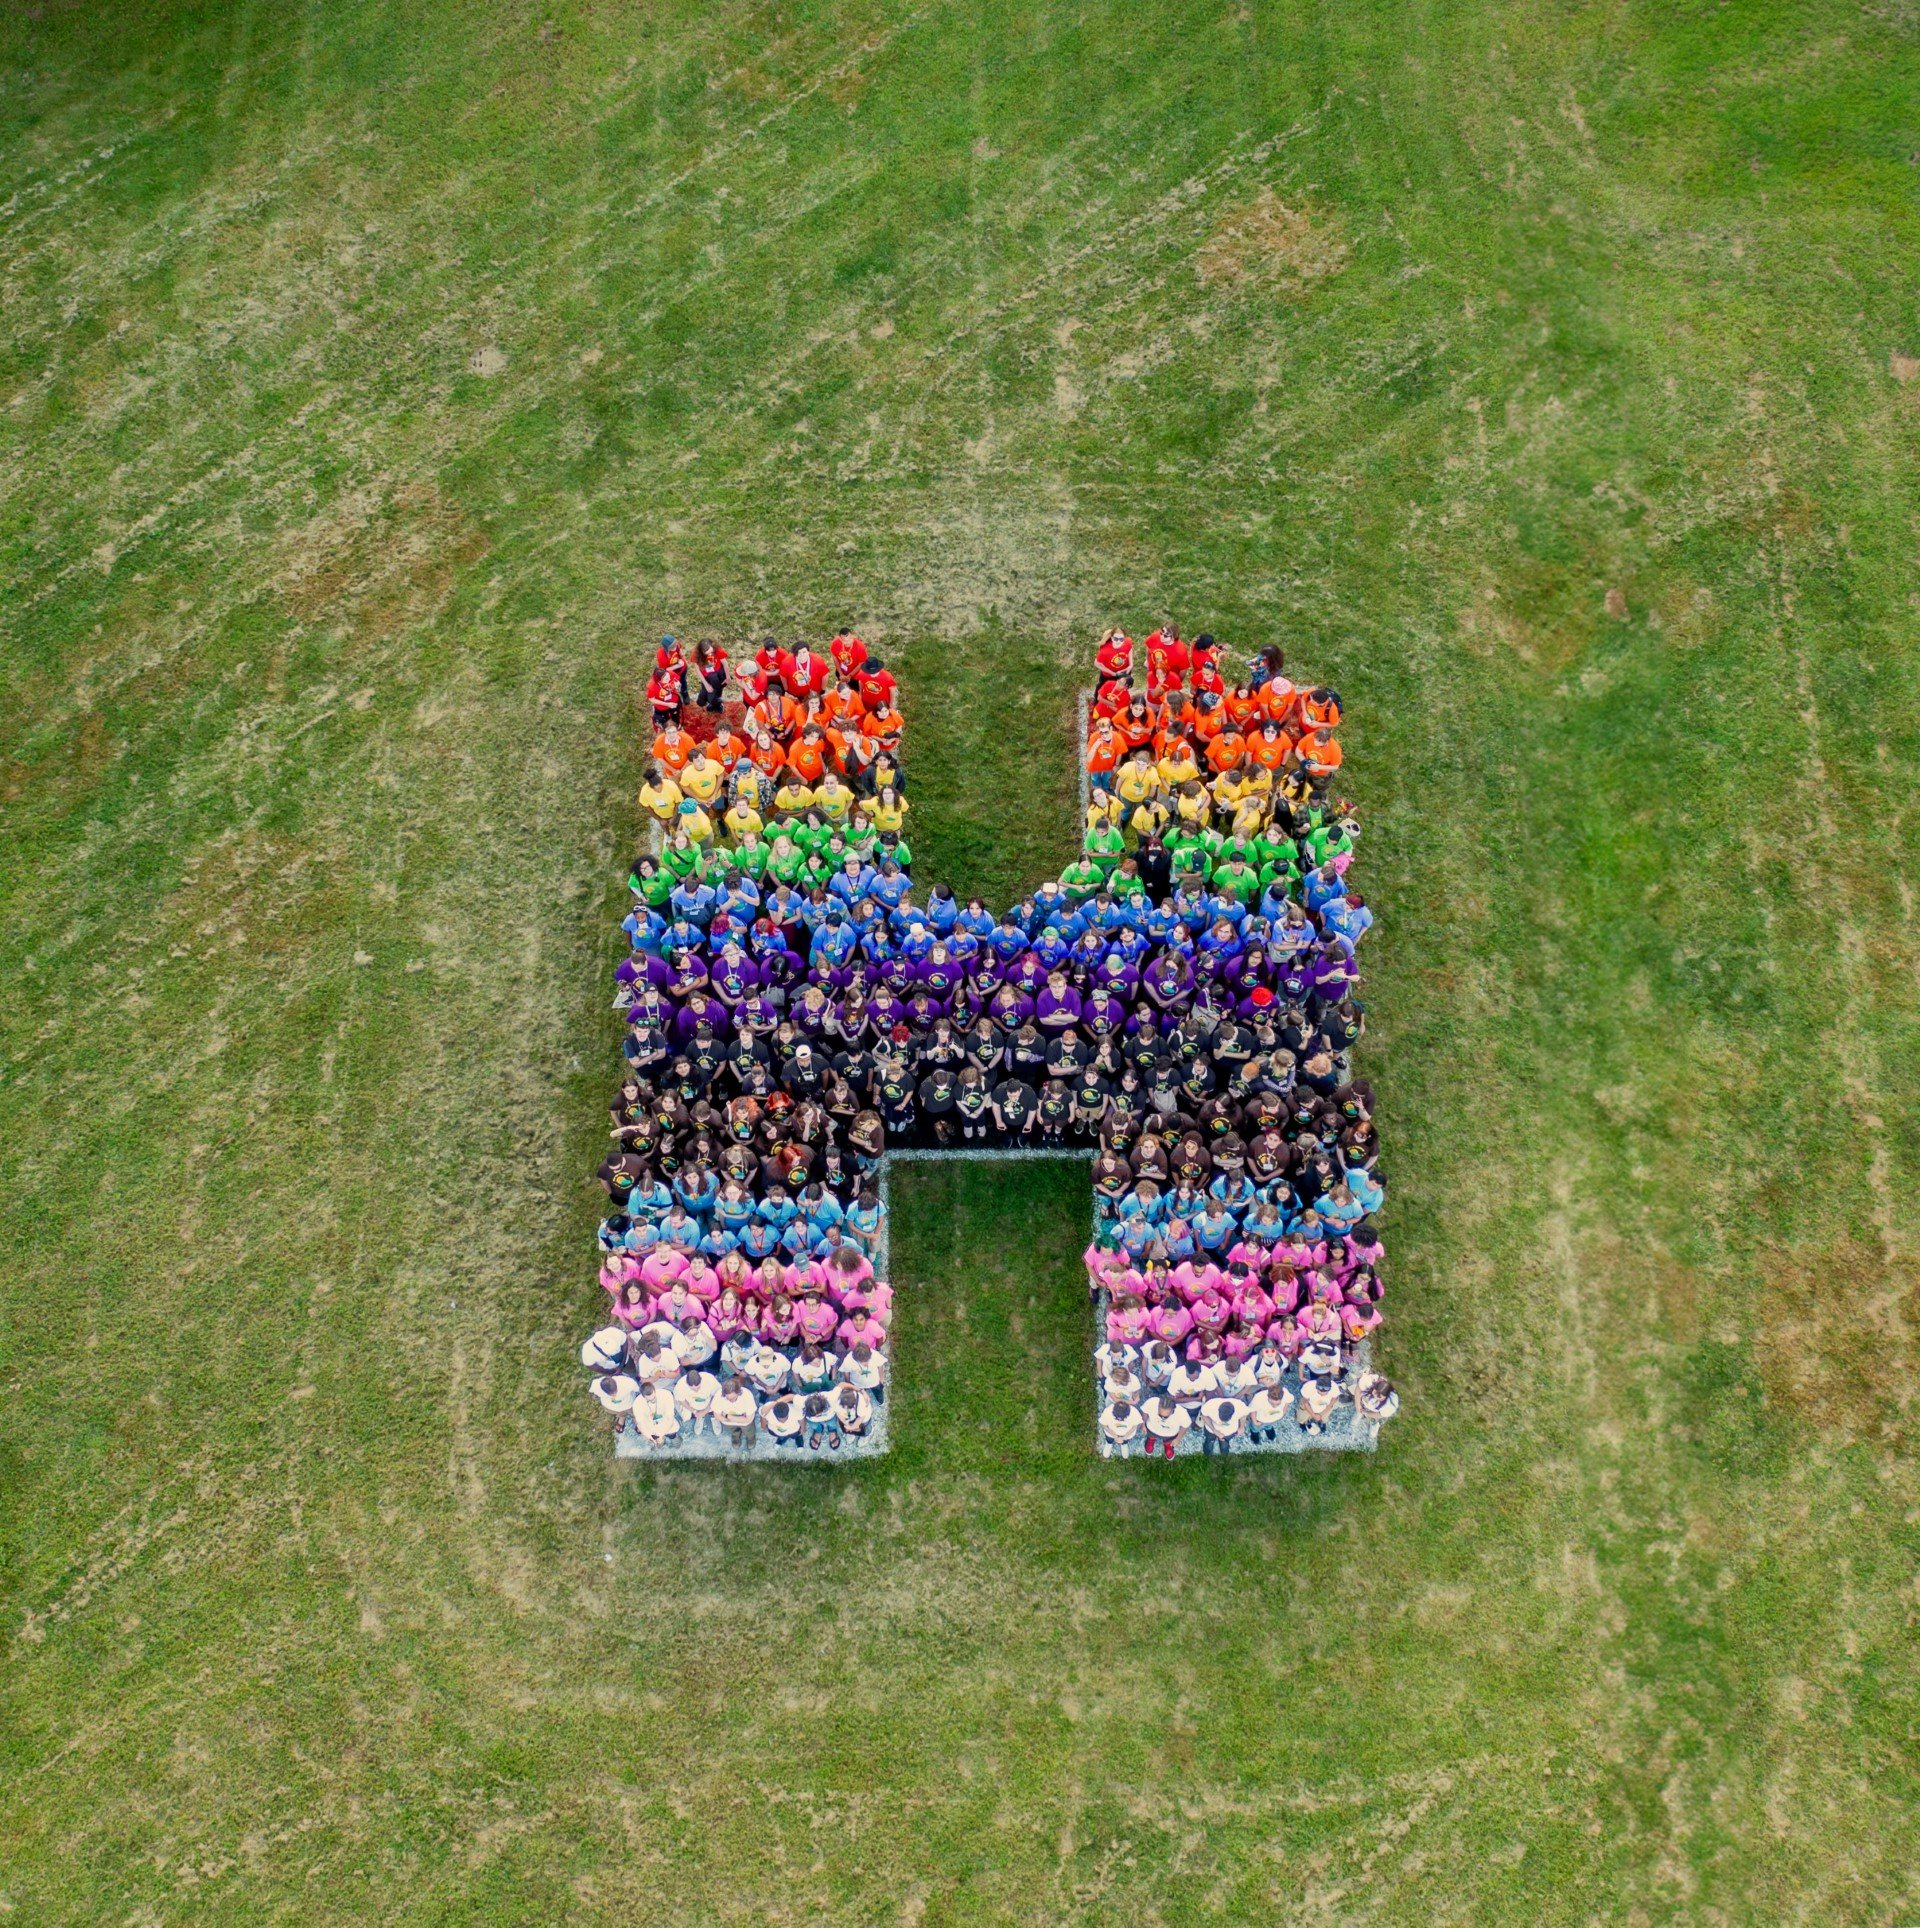 Students form a multicolored H in the colors (from top to bottom) red, orange, yellow, green, blue, purple, black, brown, light blue, pink, white. Behind them is green grass.